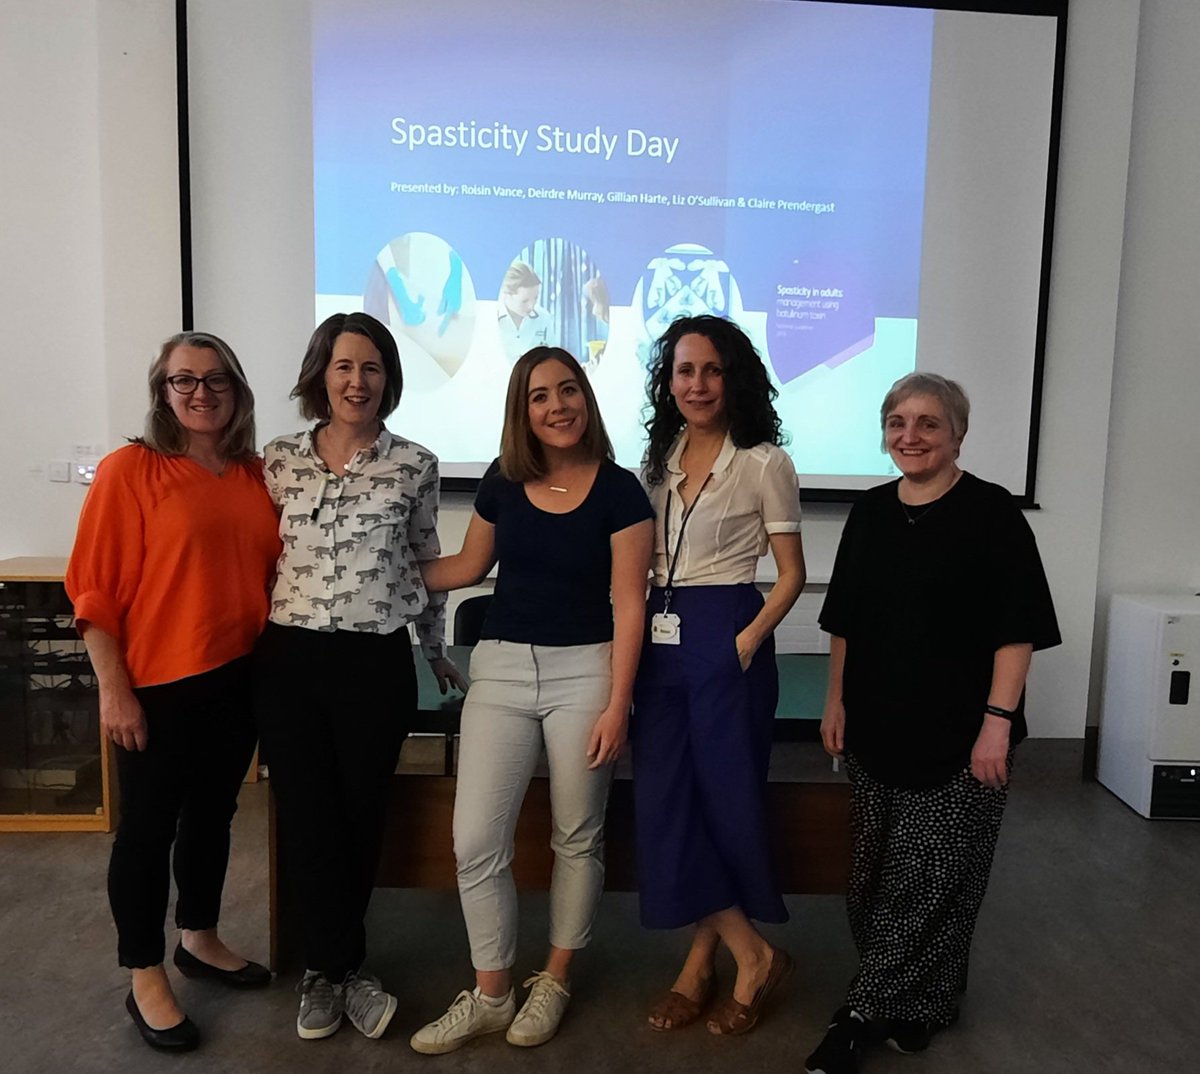 Thats a wrap! Our first ever Spasticity Study Day. Thank you to all who attended and to @cpng who assisted us. Also huge thanks to @deirdemanning.Expect lots of enthusiastic therapists coming your way soon @DeirdreMurray6a @VanceRoisin @osullivan_y @GillianAHarte